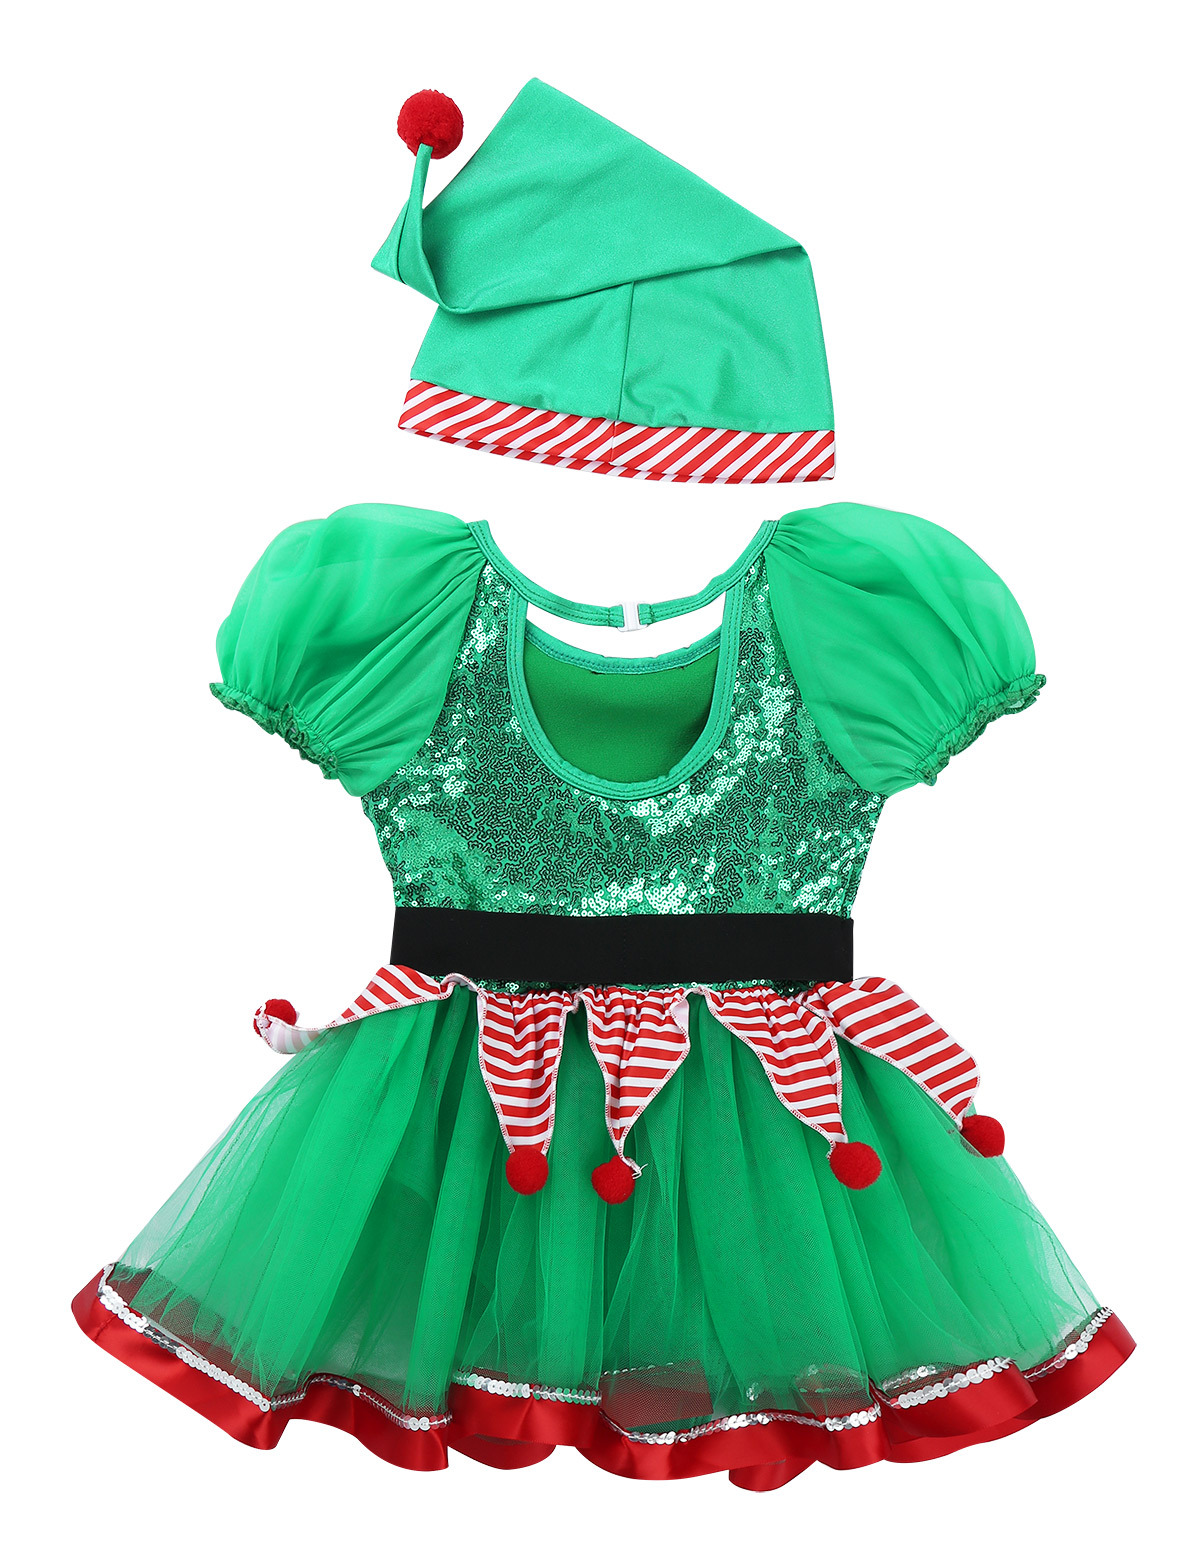 inhzoy Kids Girls Christmas Elf Cosplay Costume Xmas Outfits Sequin Tutu Dress Green 7 - image 4 of 7